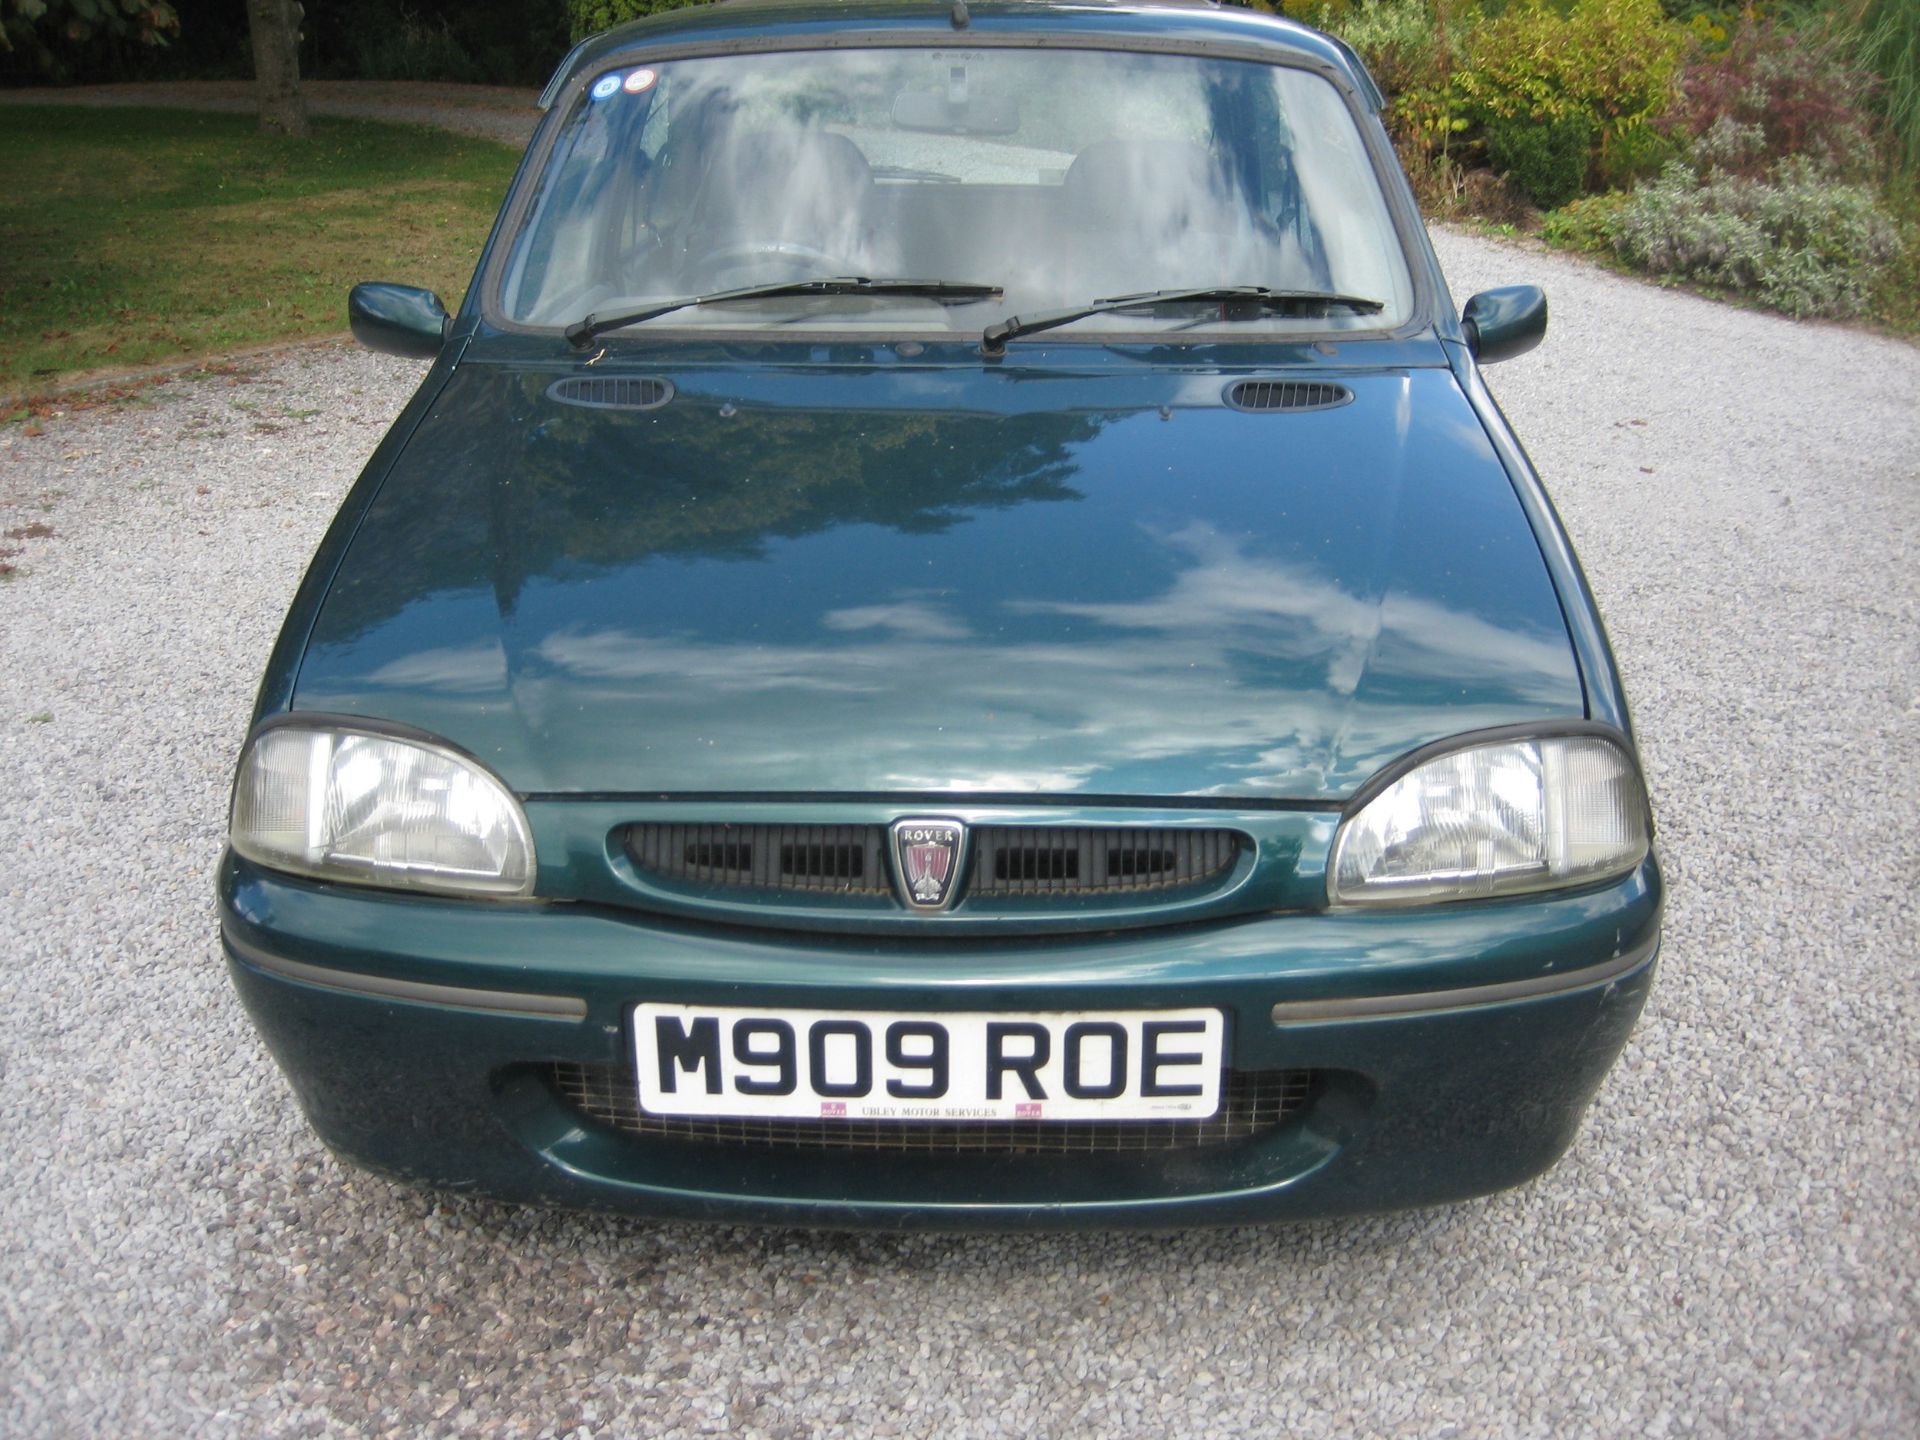 1995 Rover Metro GTA Being sold without reserve Registration number M909 ROE British Racing Green - Image 2 of 29